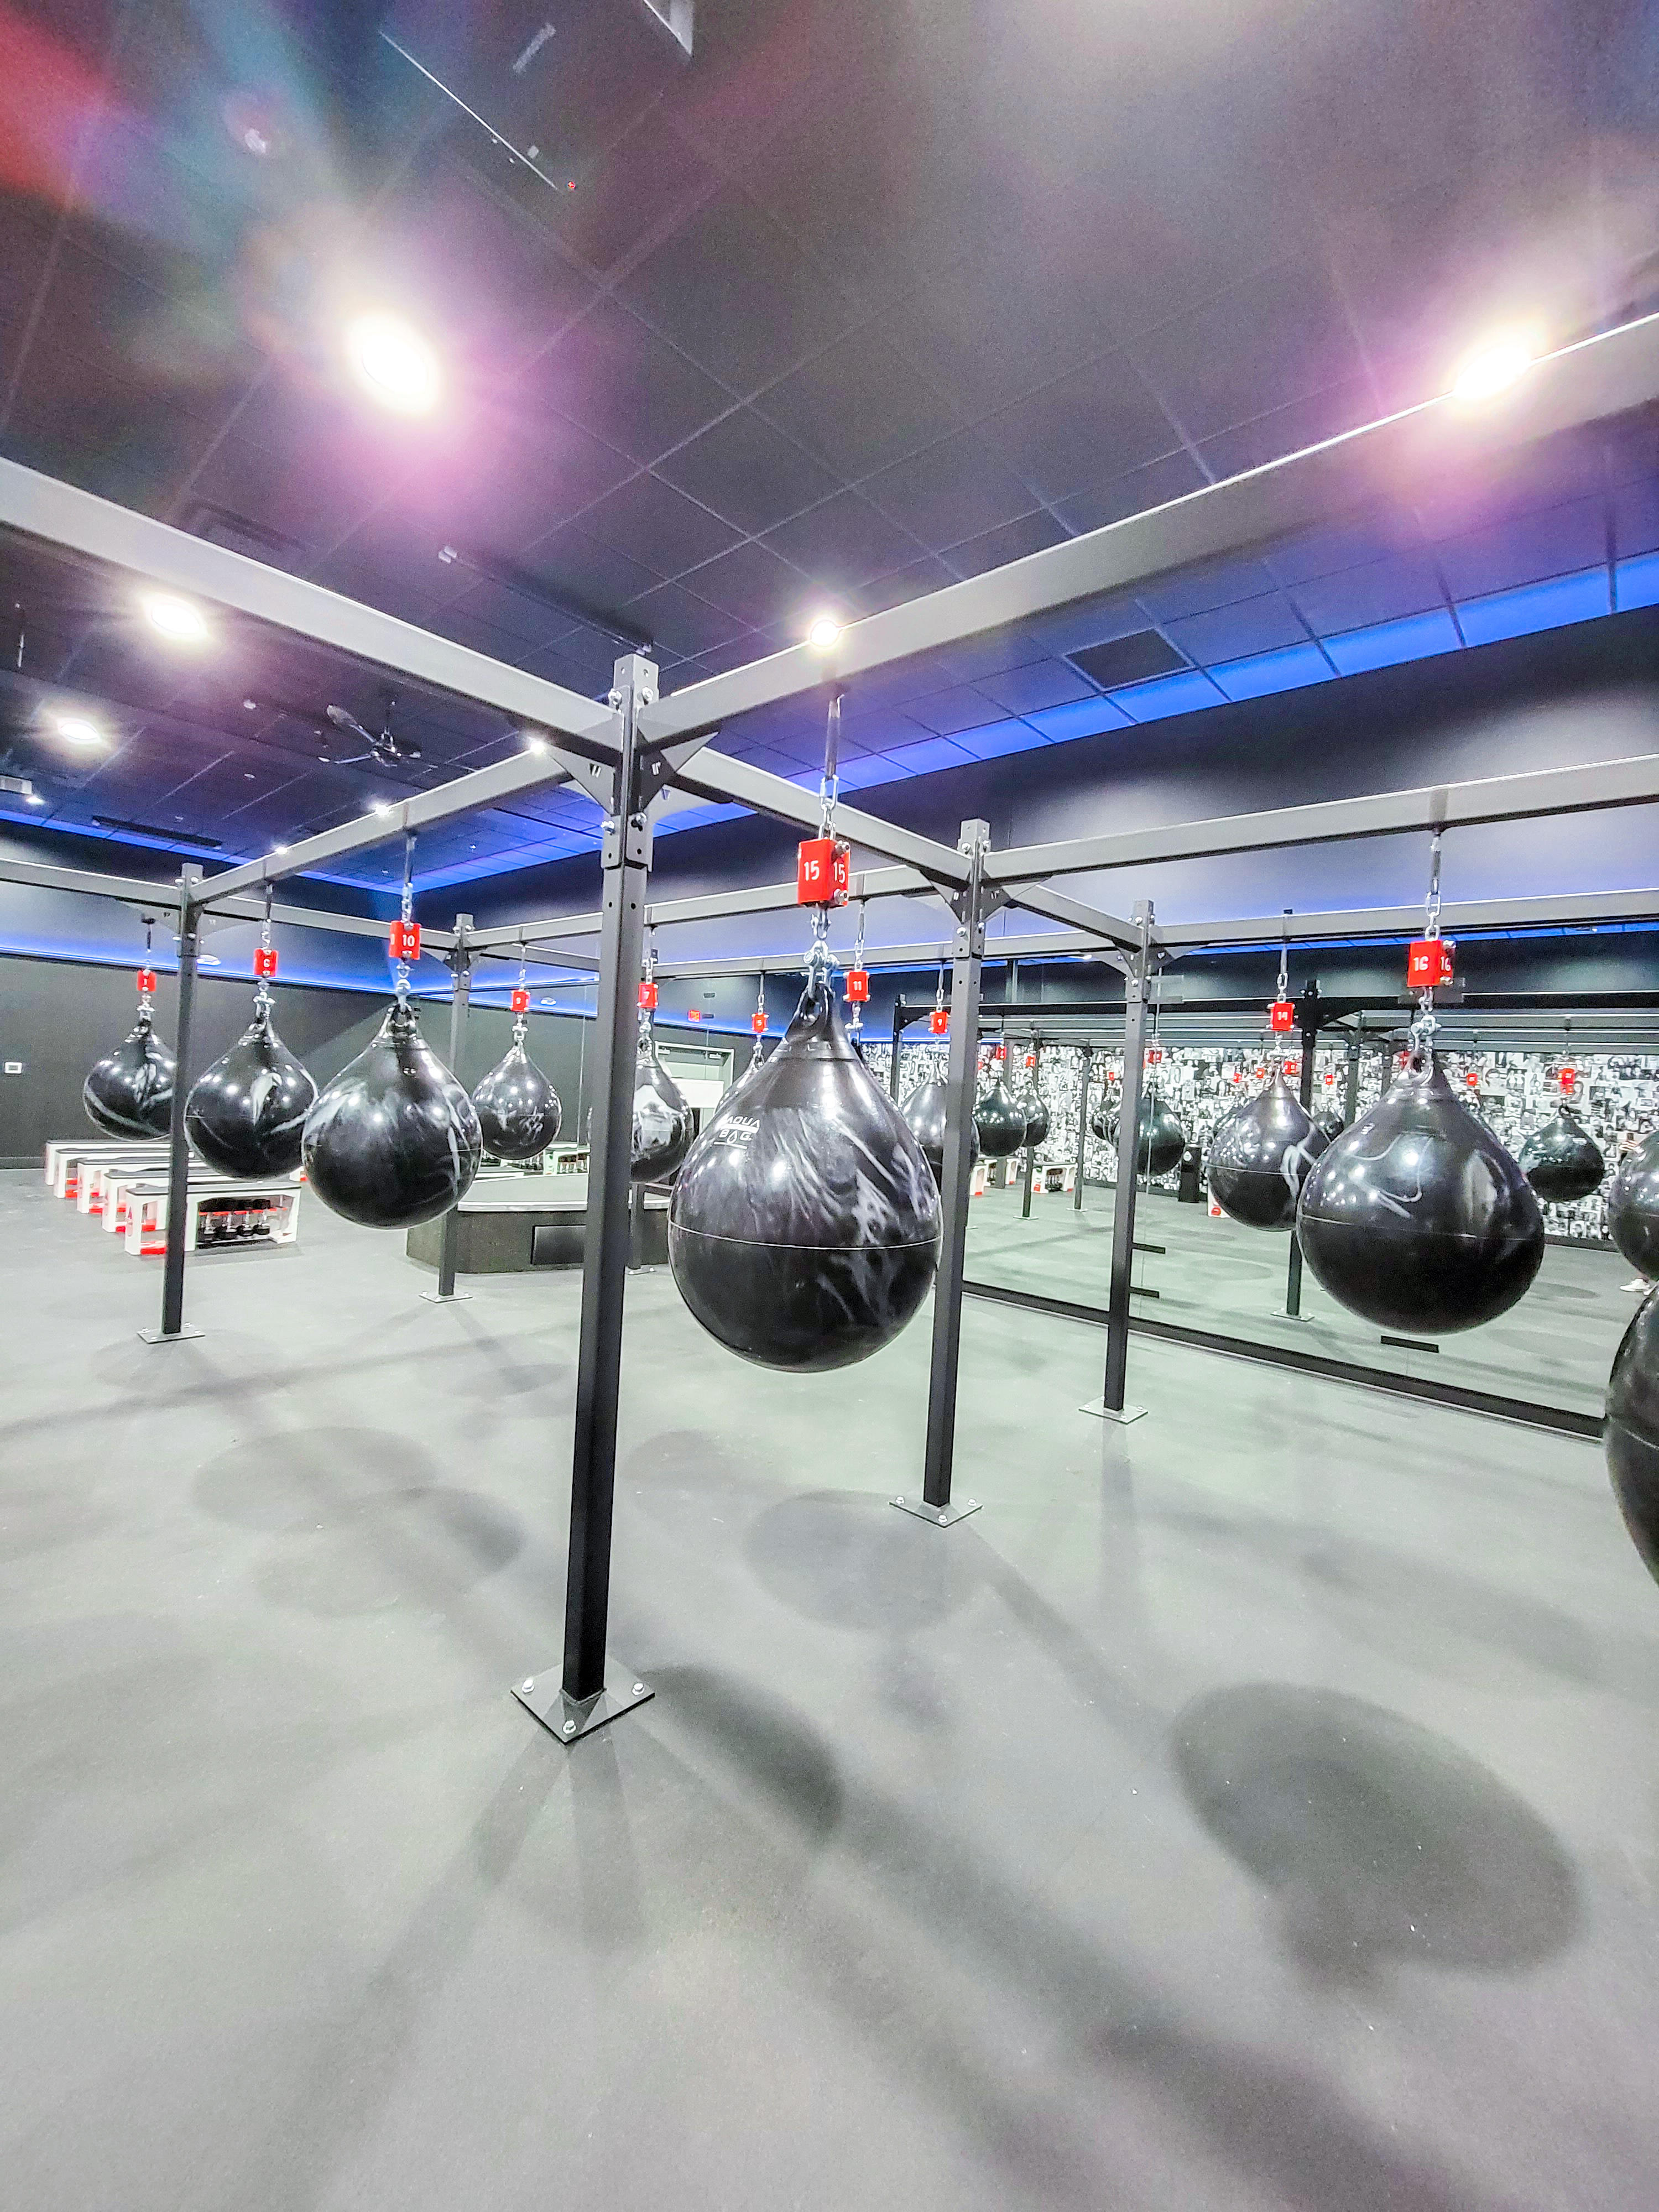 Boxing, HIIT, METCON and strength training - your ideal full-body workout destination is at Rumble Boxing Anchorage.